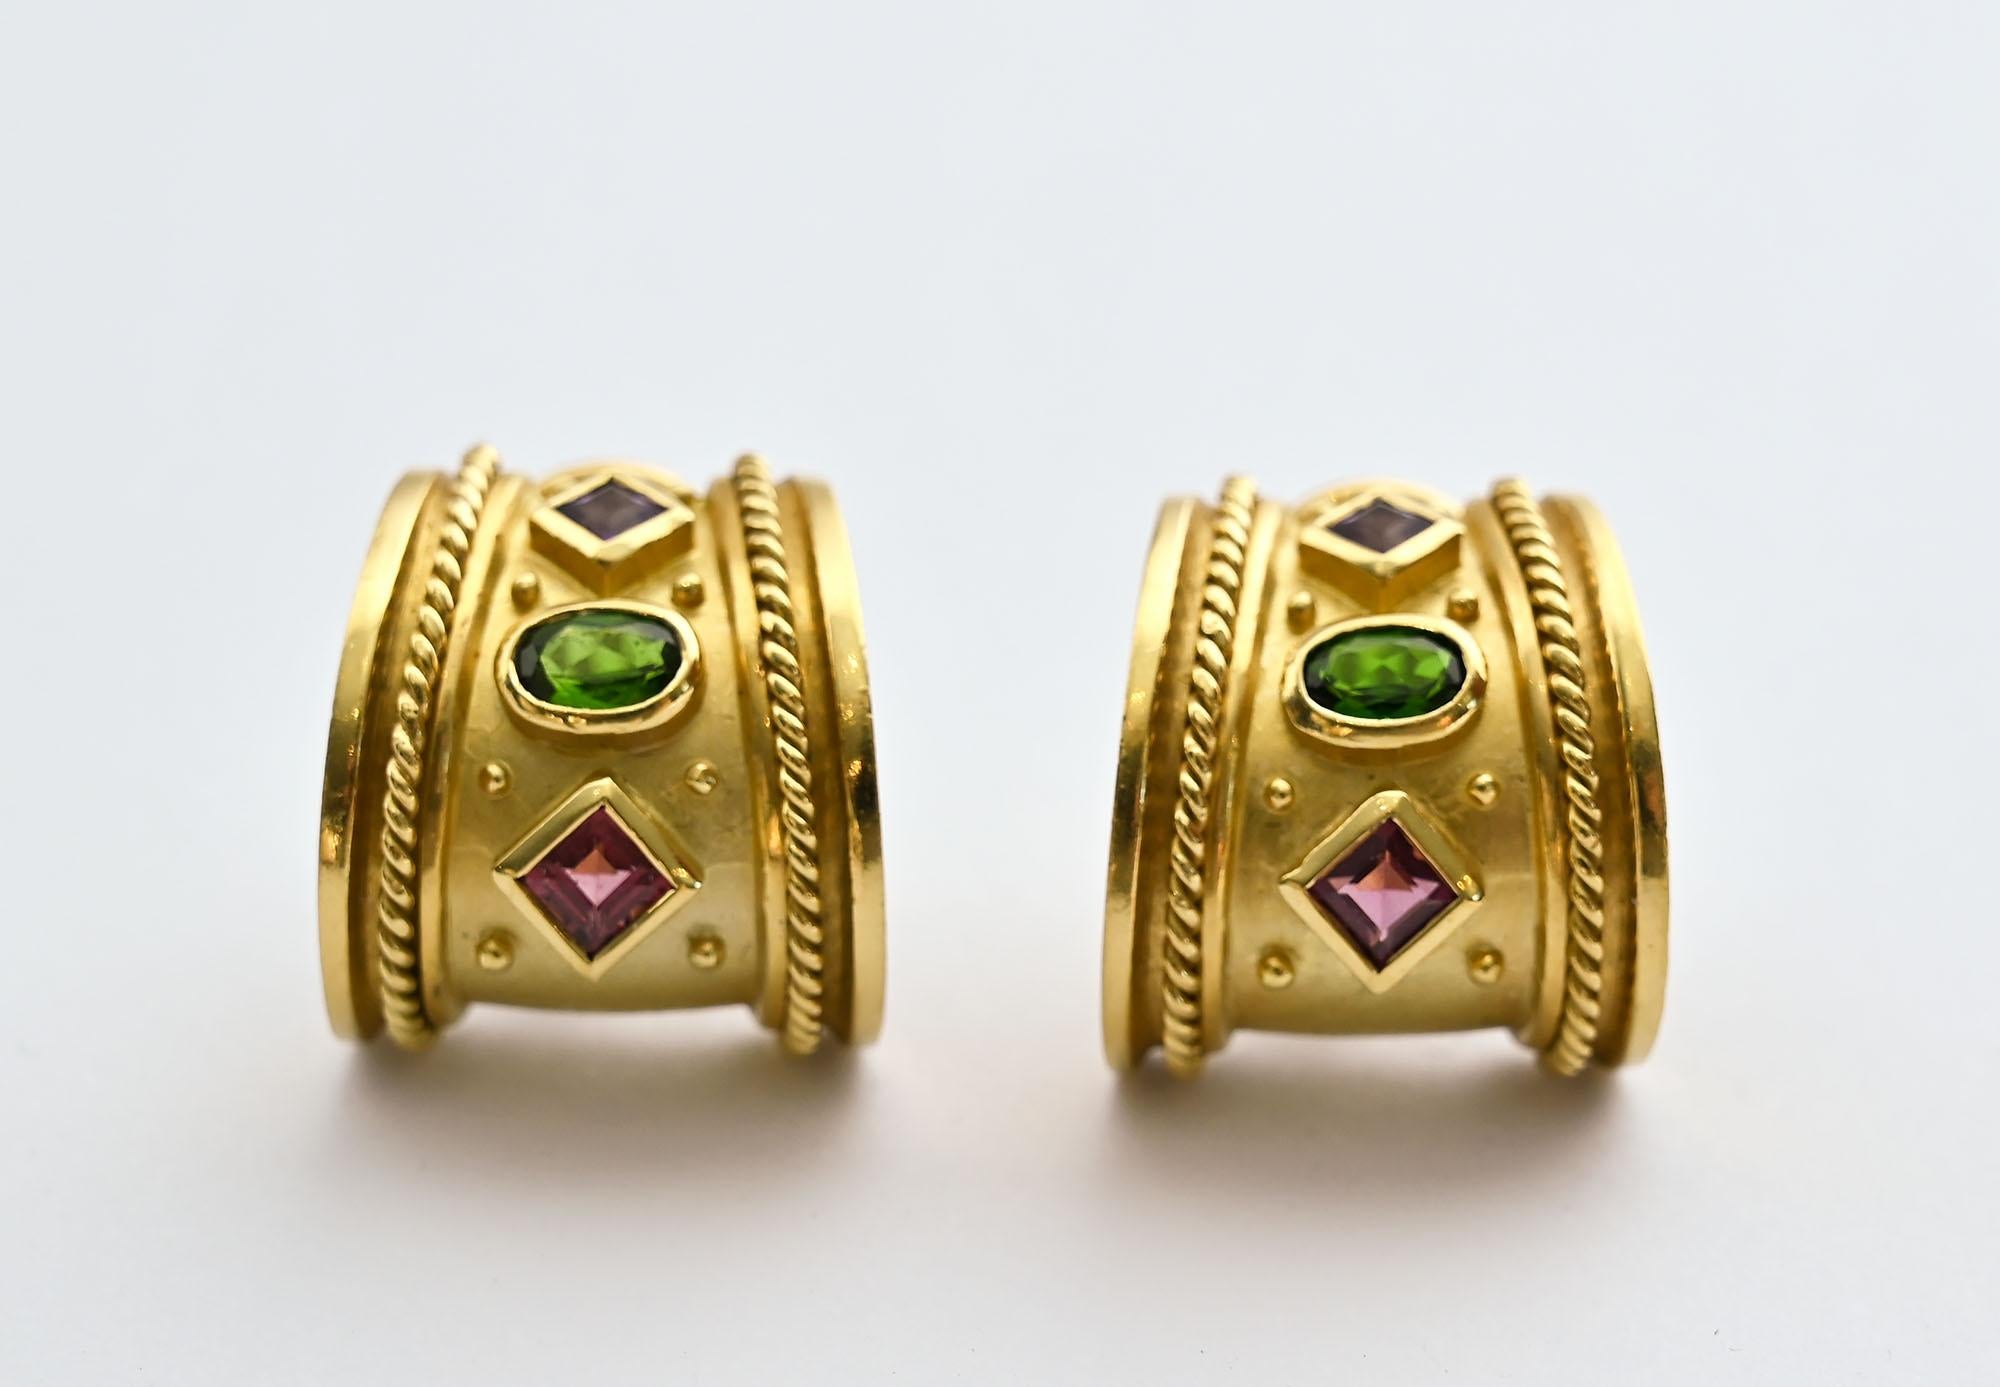 Seidengang half hoop earrings embellished with both pink and green tourmaline and an amethyst as well as gold balls and braiding. The earrings have both post and clip backs. The bottom of the earrings measures 3/4